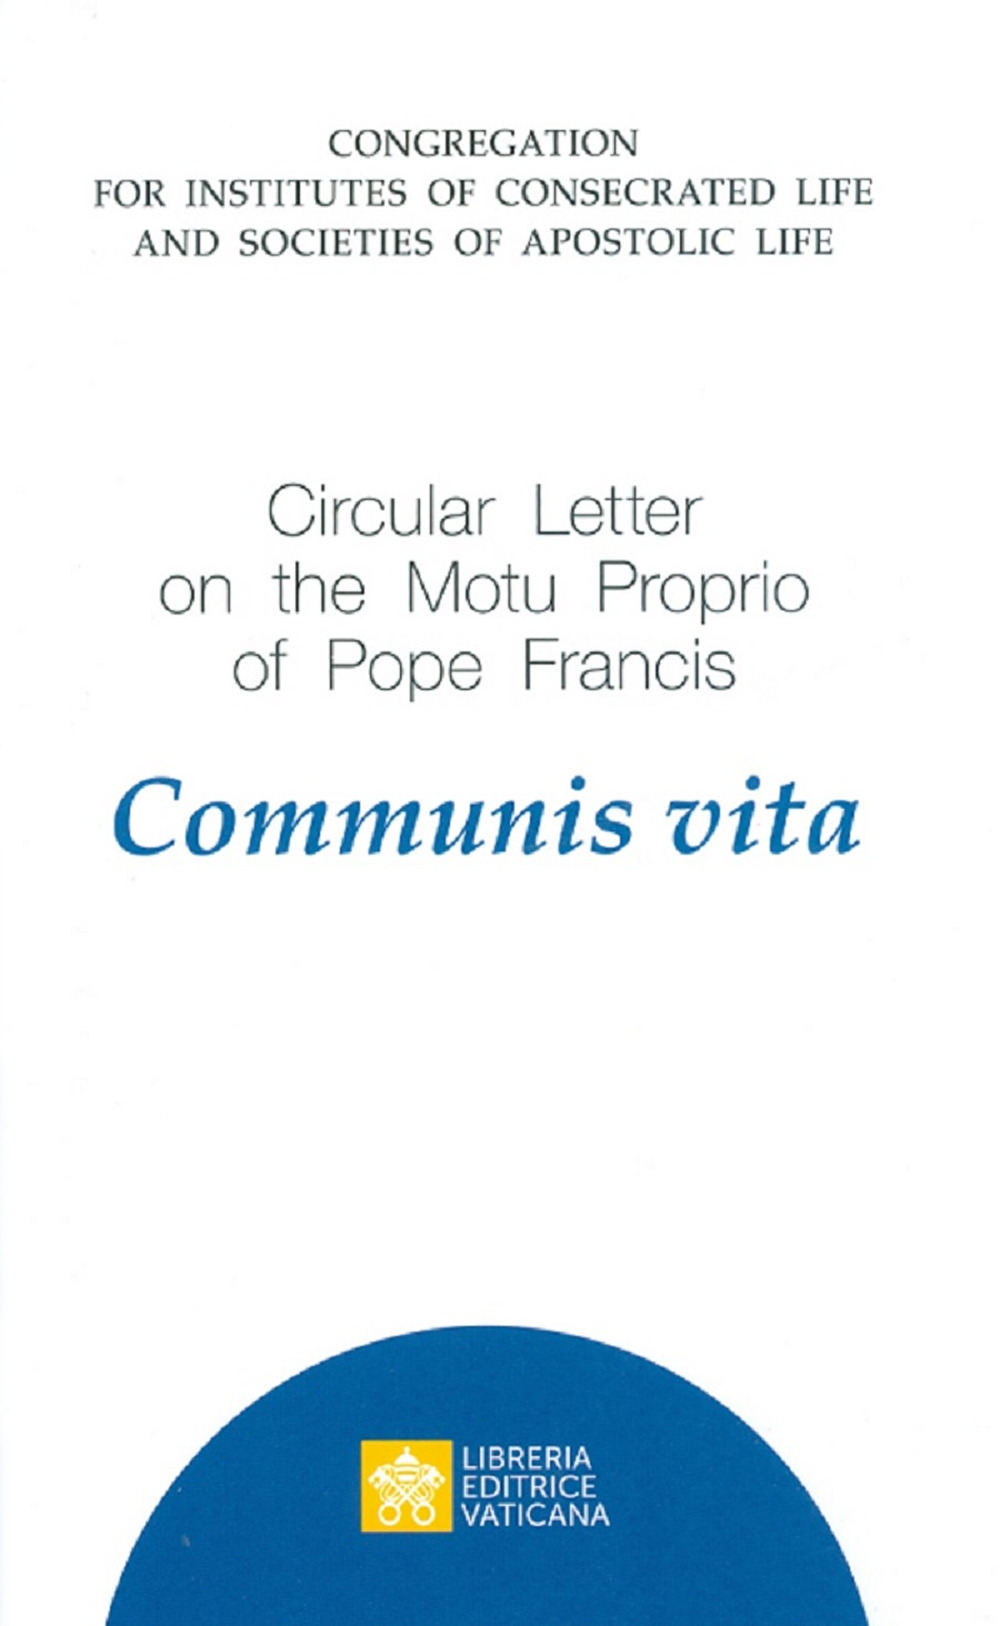 Image of Circular Letter on the Motu Proprio of Pope Francis